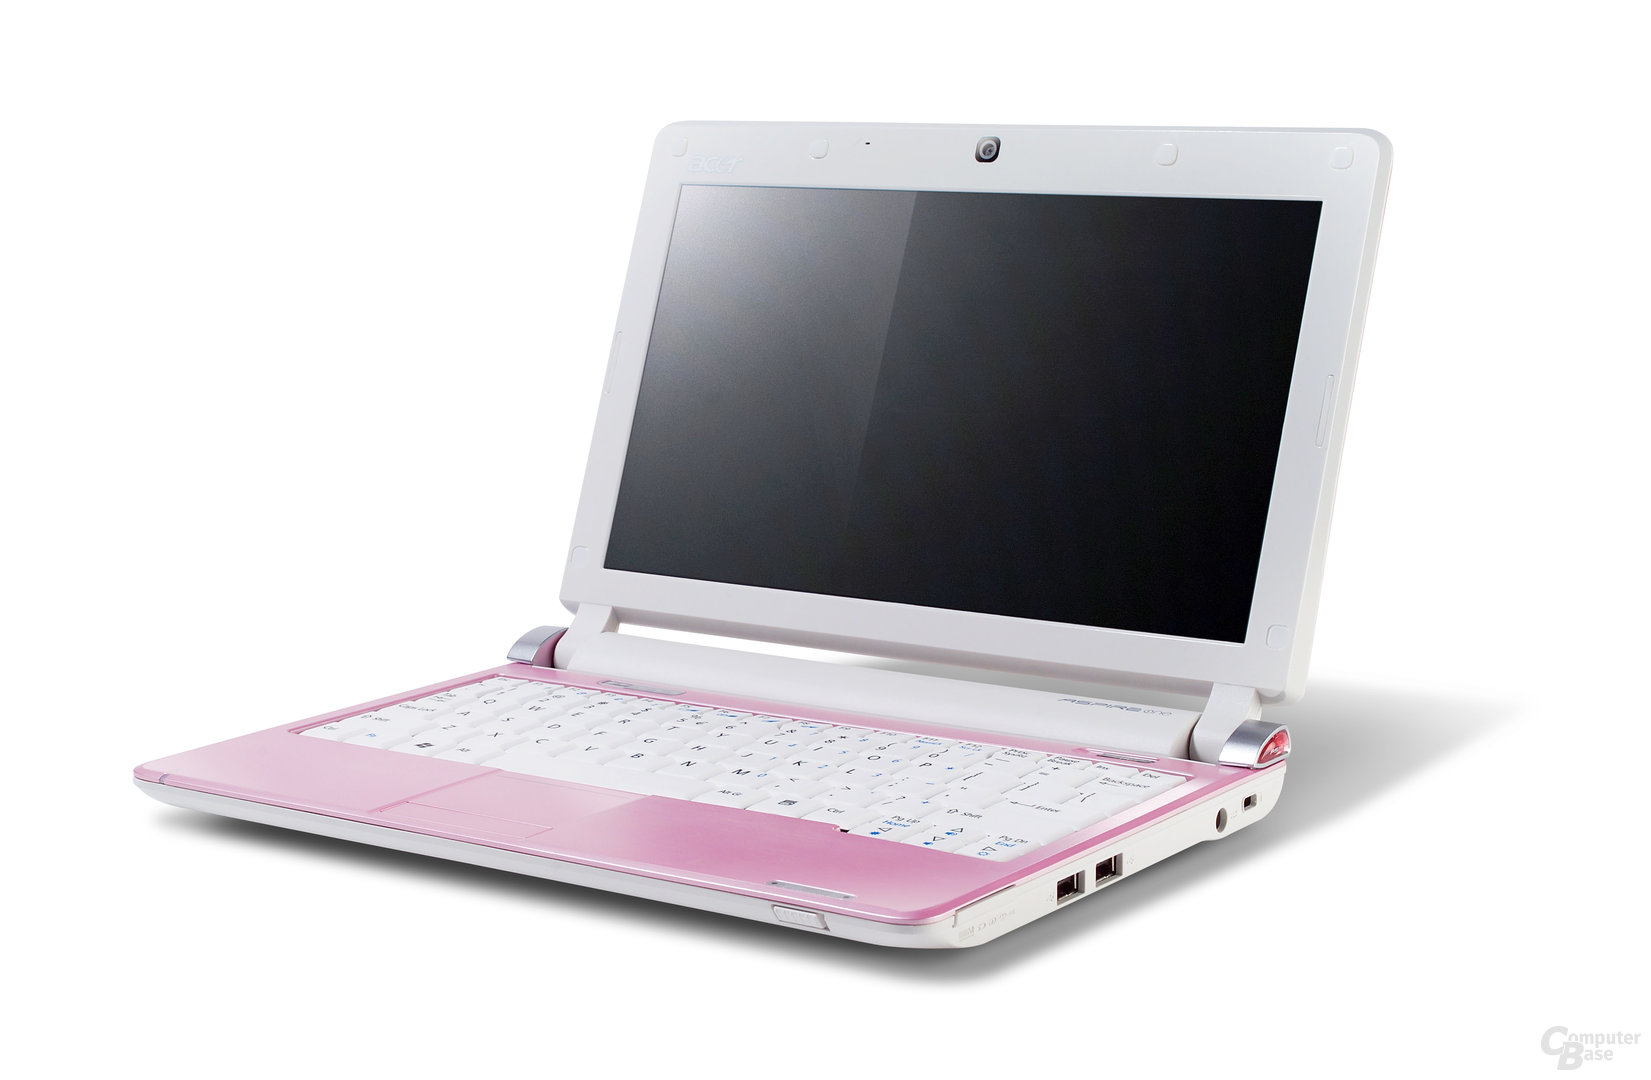 Acer Aspire one D250 in pink